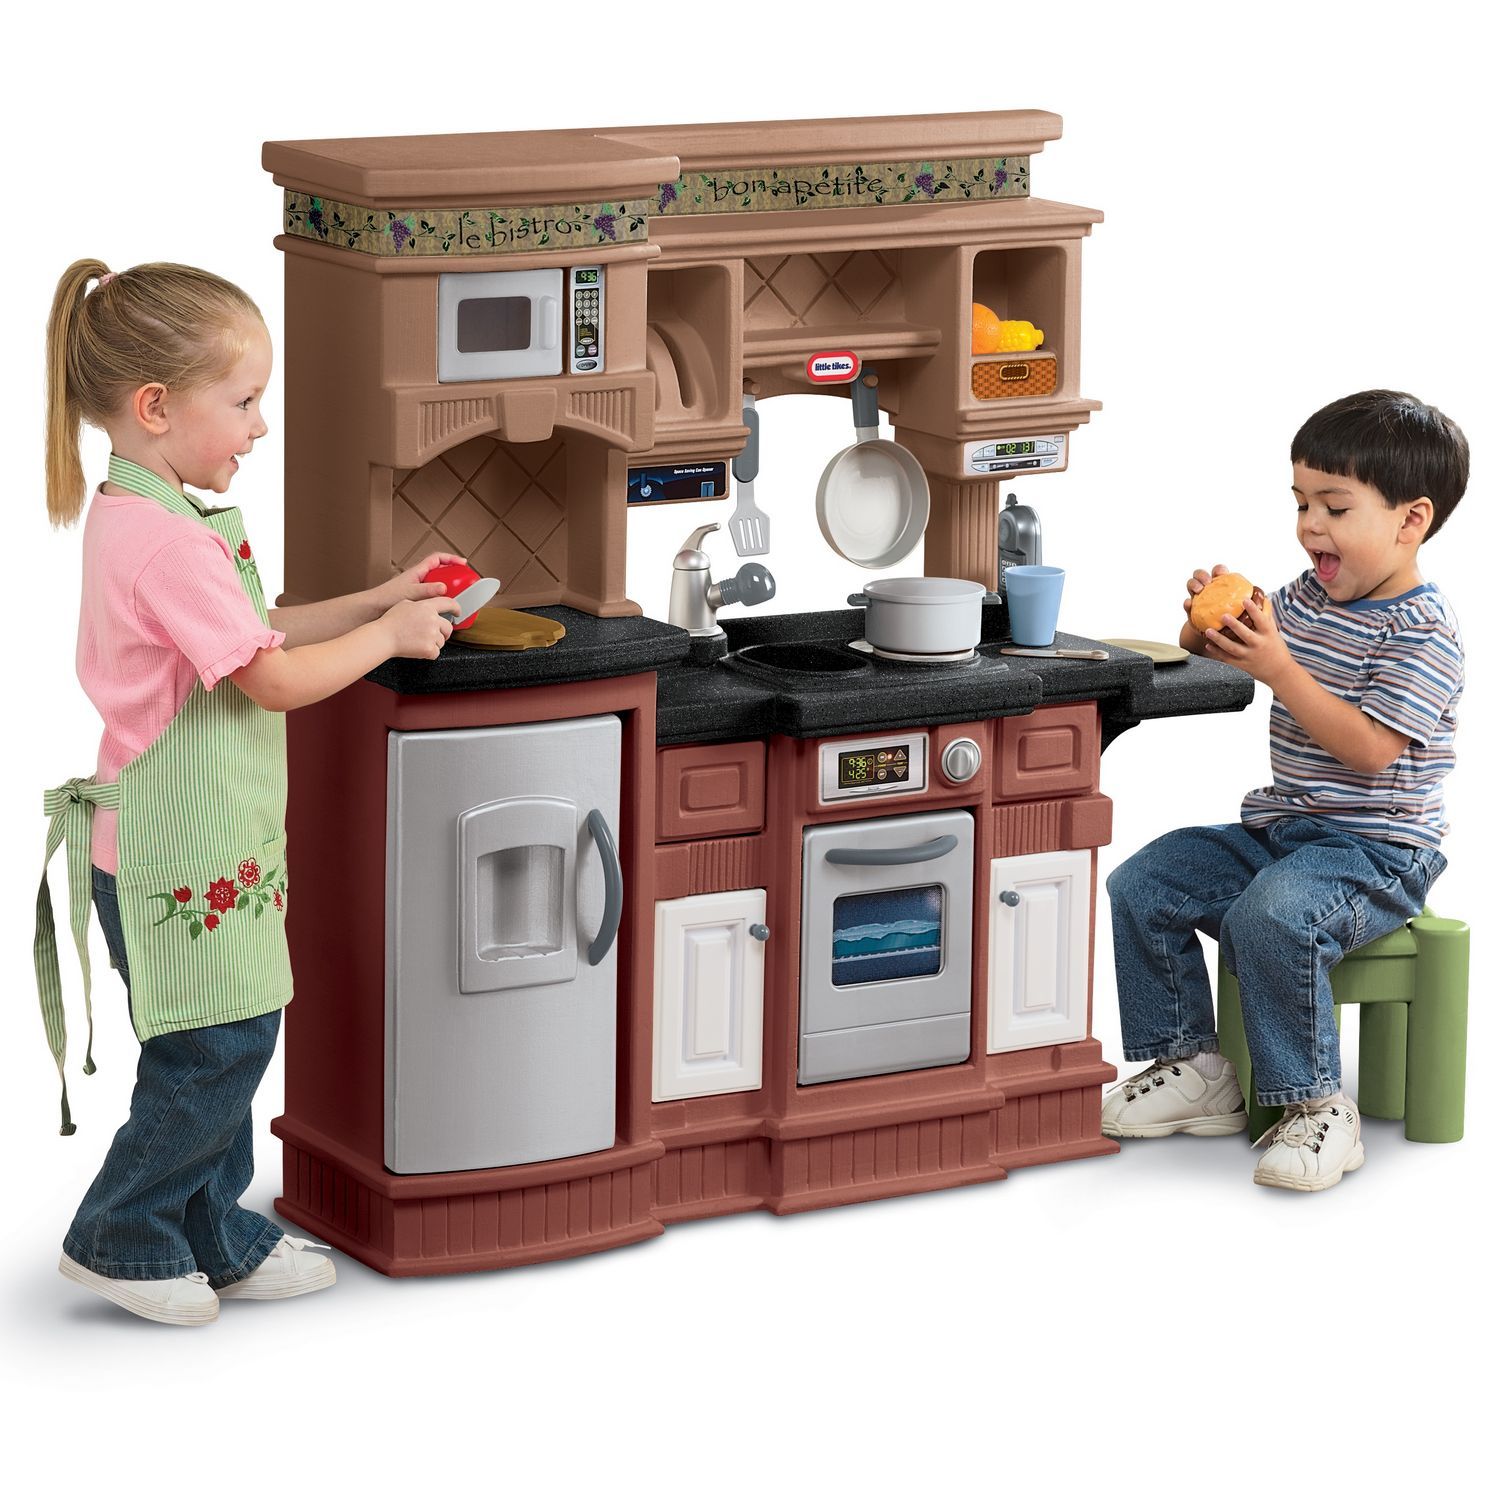 Little Tikes Gourmet Prep 'n Serve Kids Pretend Play Working Toy Cooking Kitchen - image 1 of 6